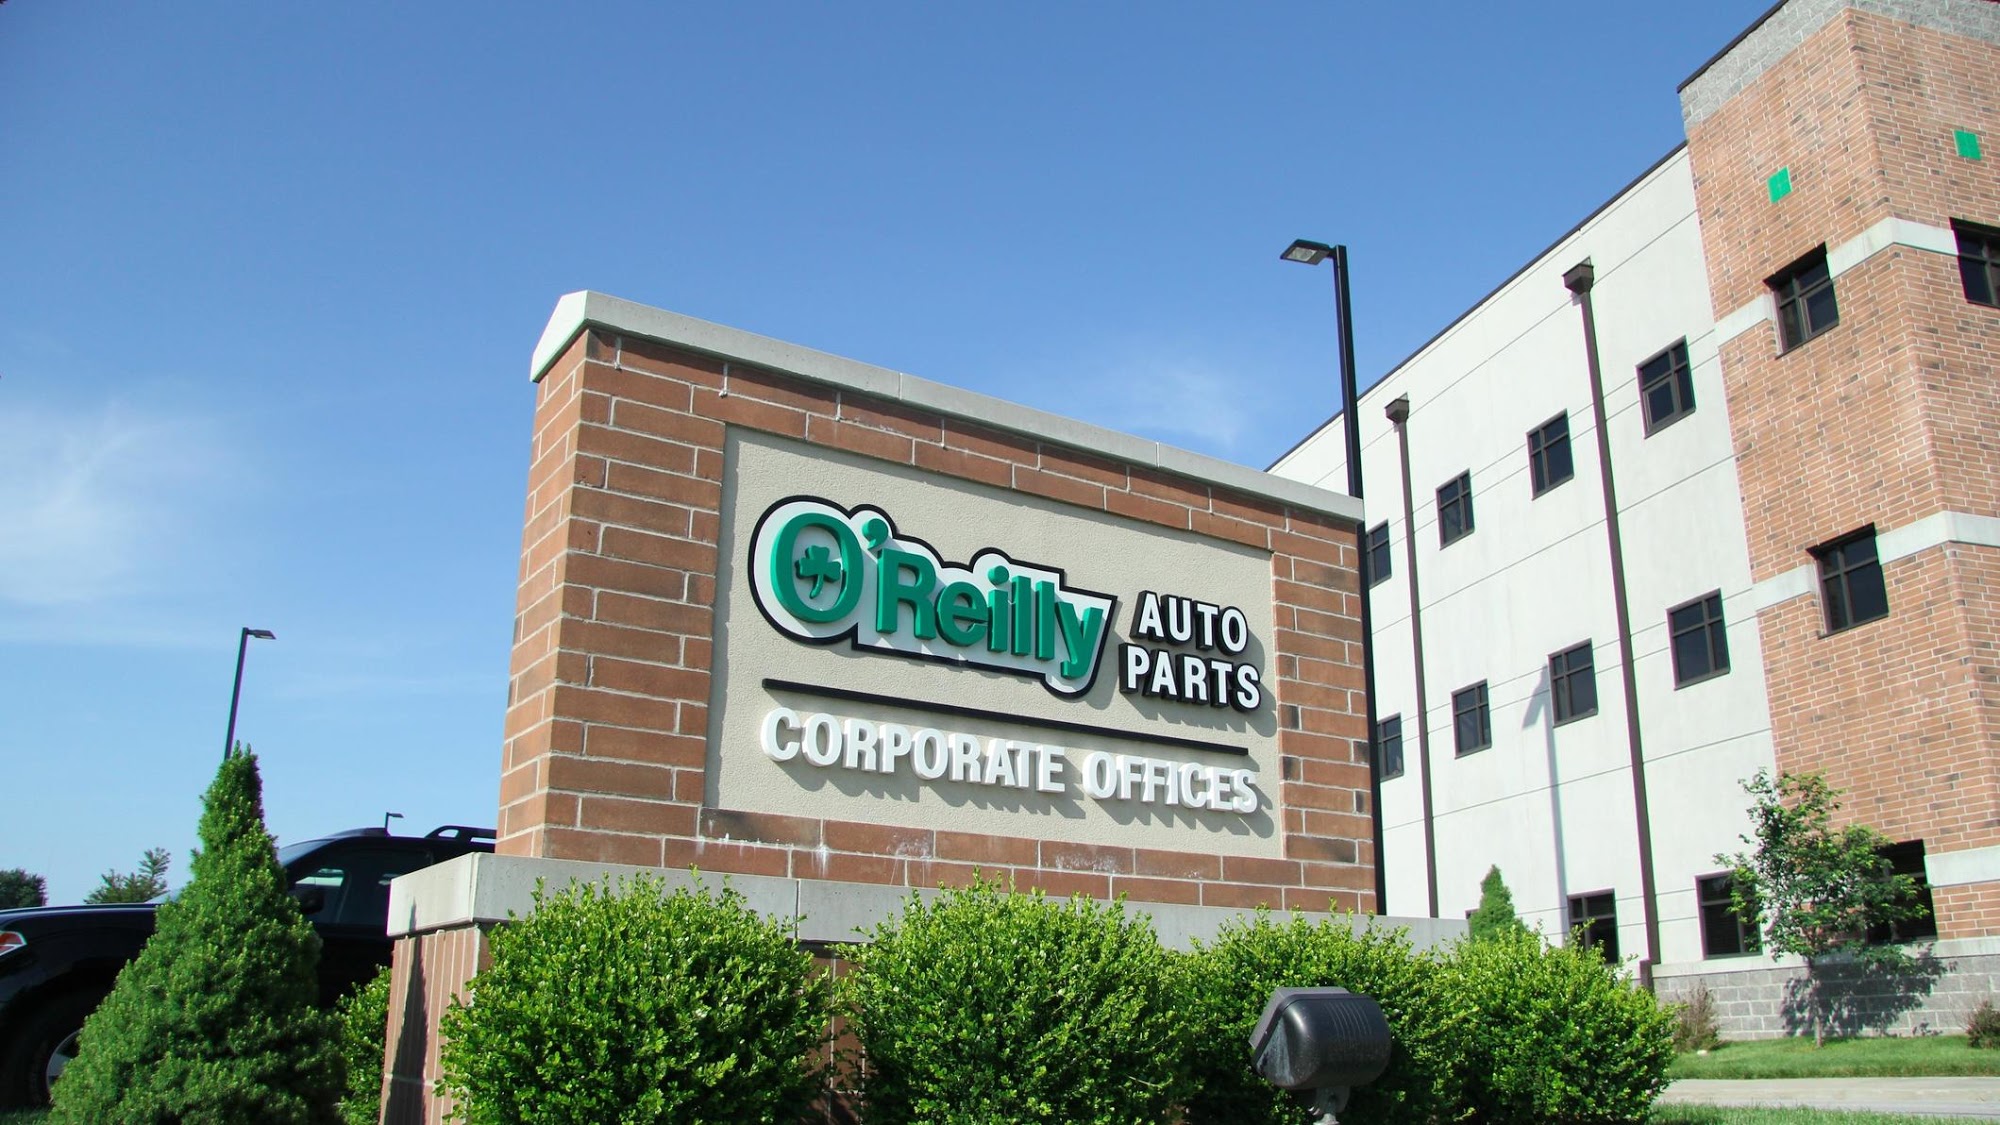 O'Reilly Auto Parts - Corporate Office